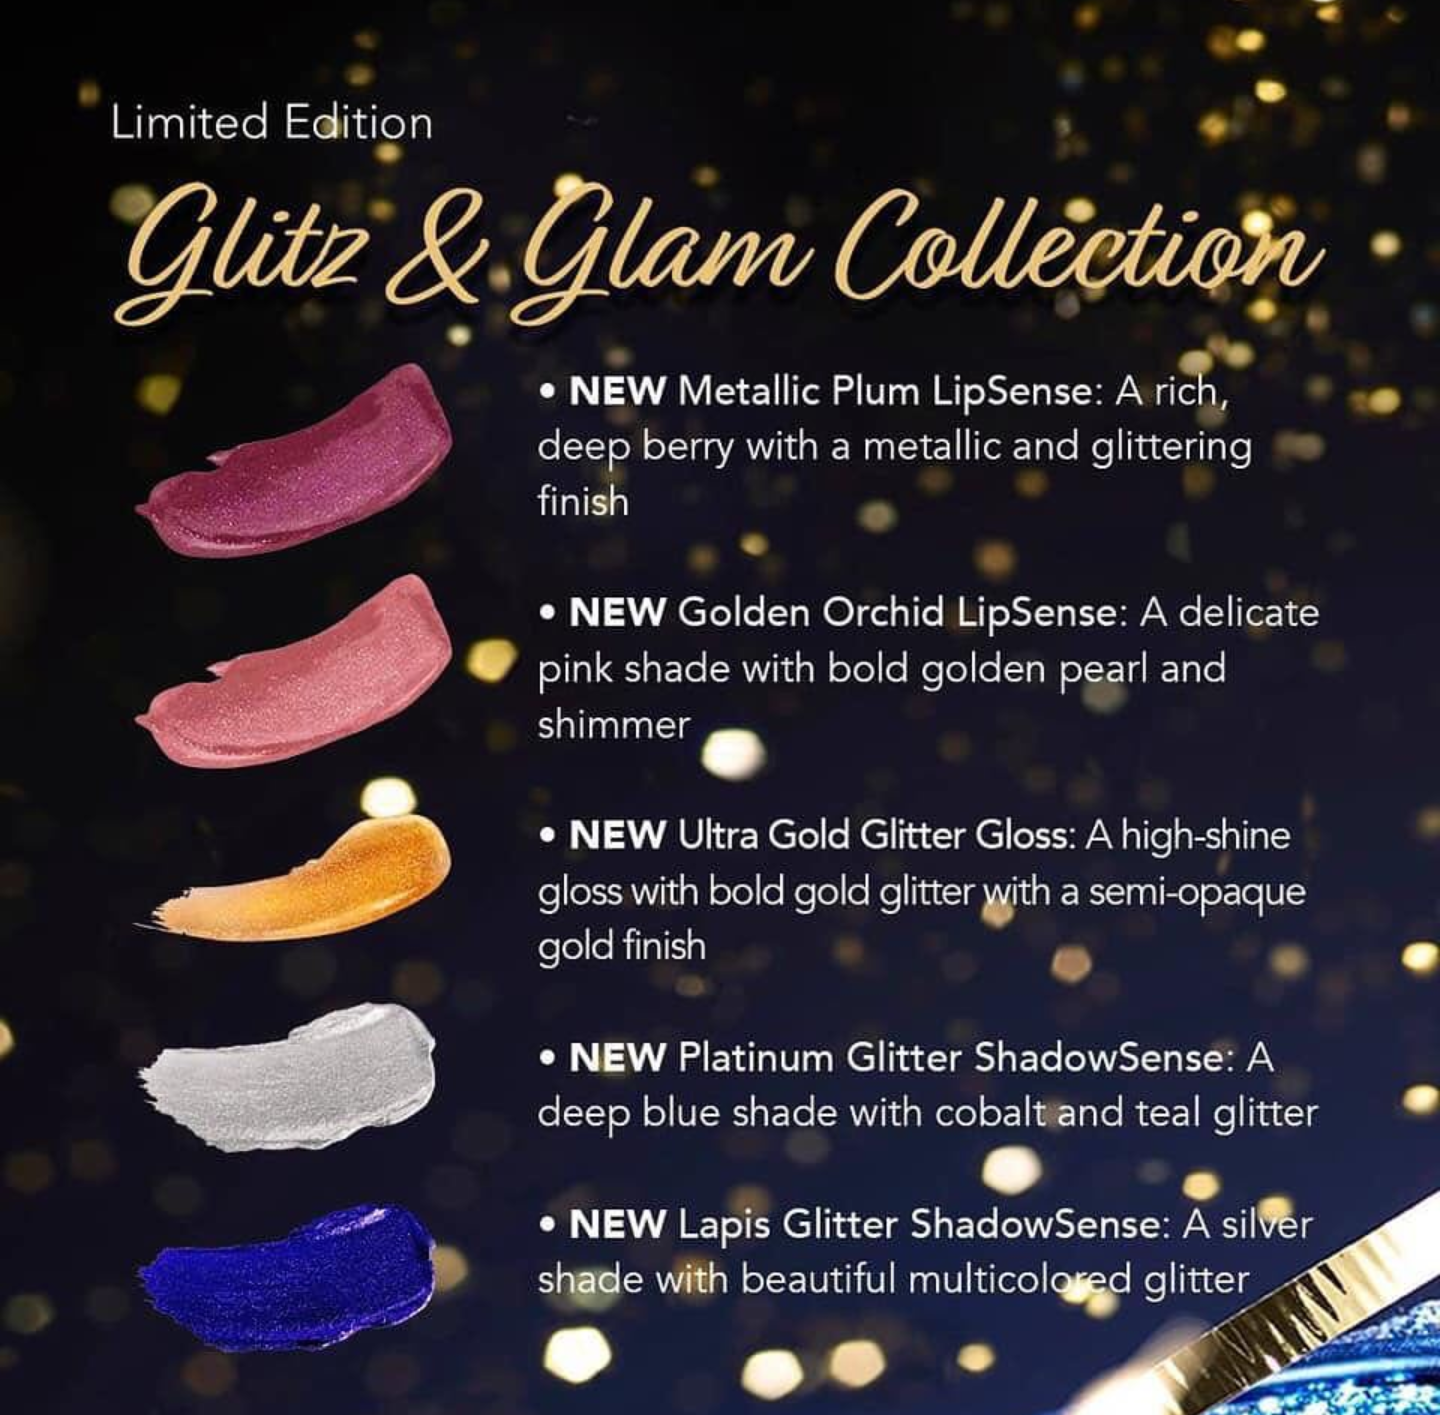 New metallic plum limited edition lipsense color from the 